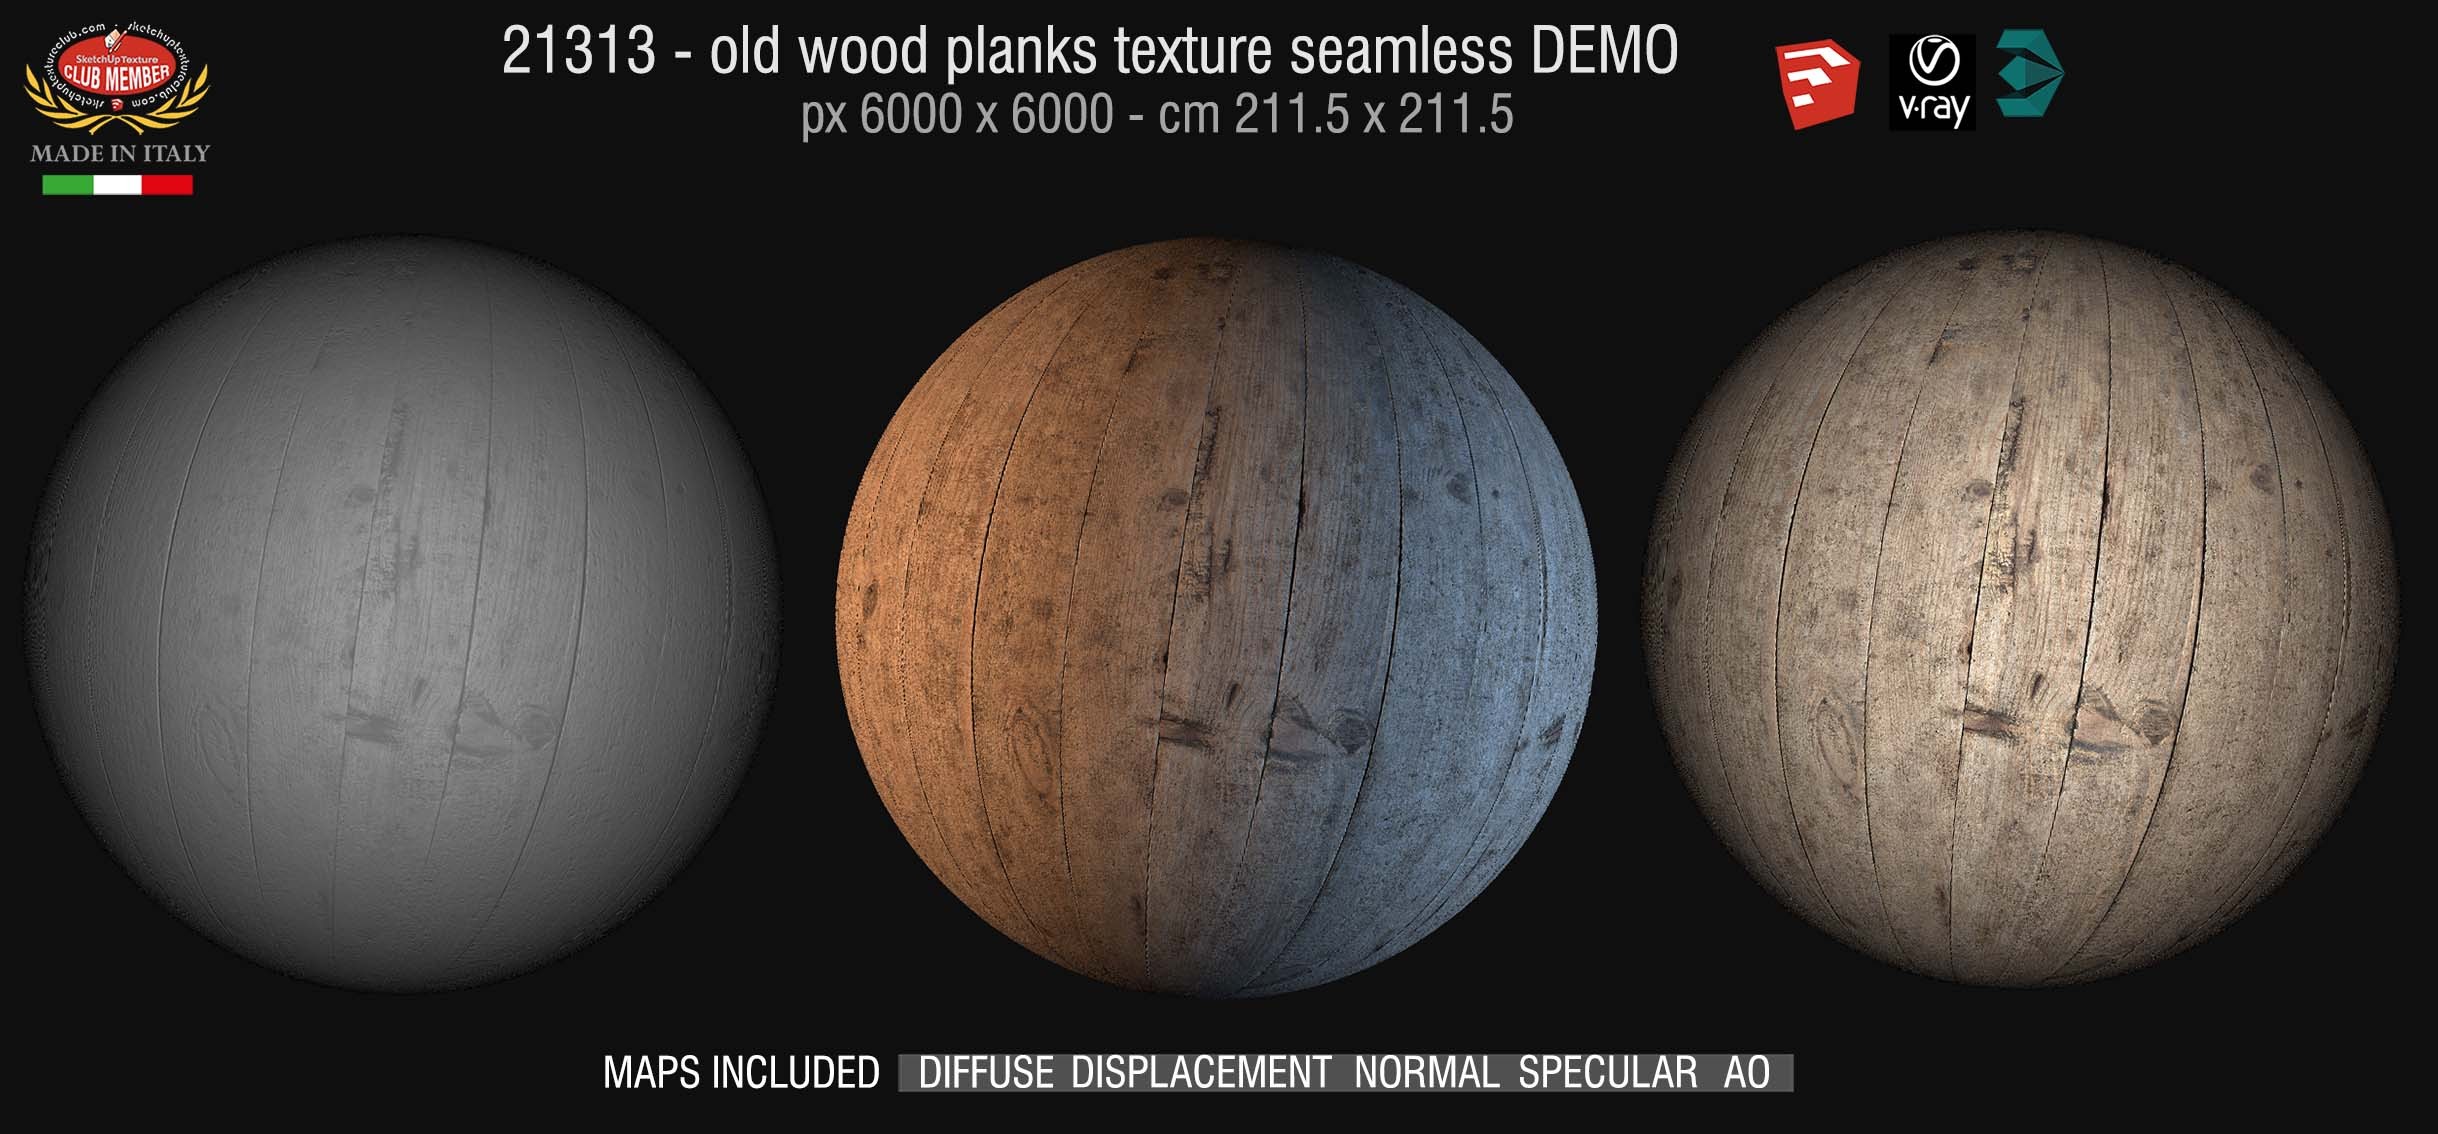 21313 HR Old wood planks texture seamless + maps DEMO